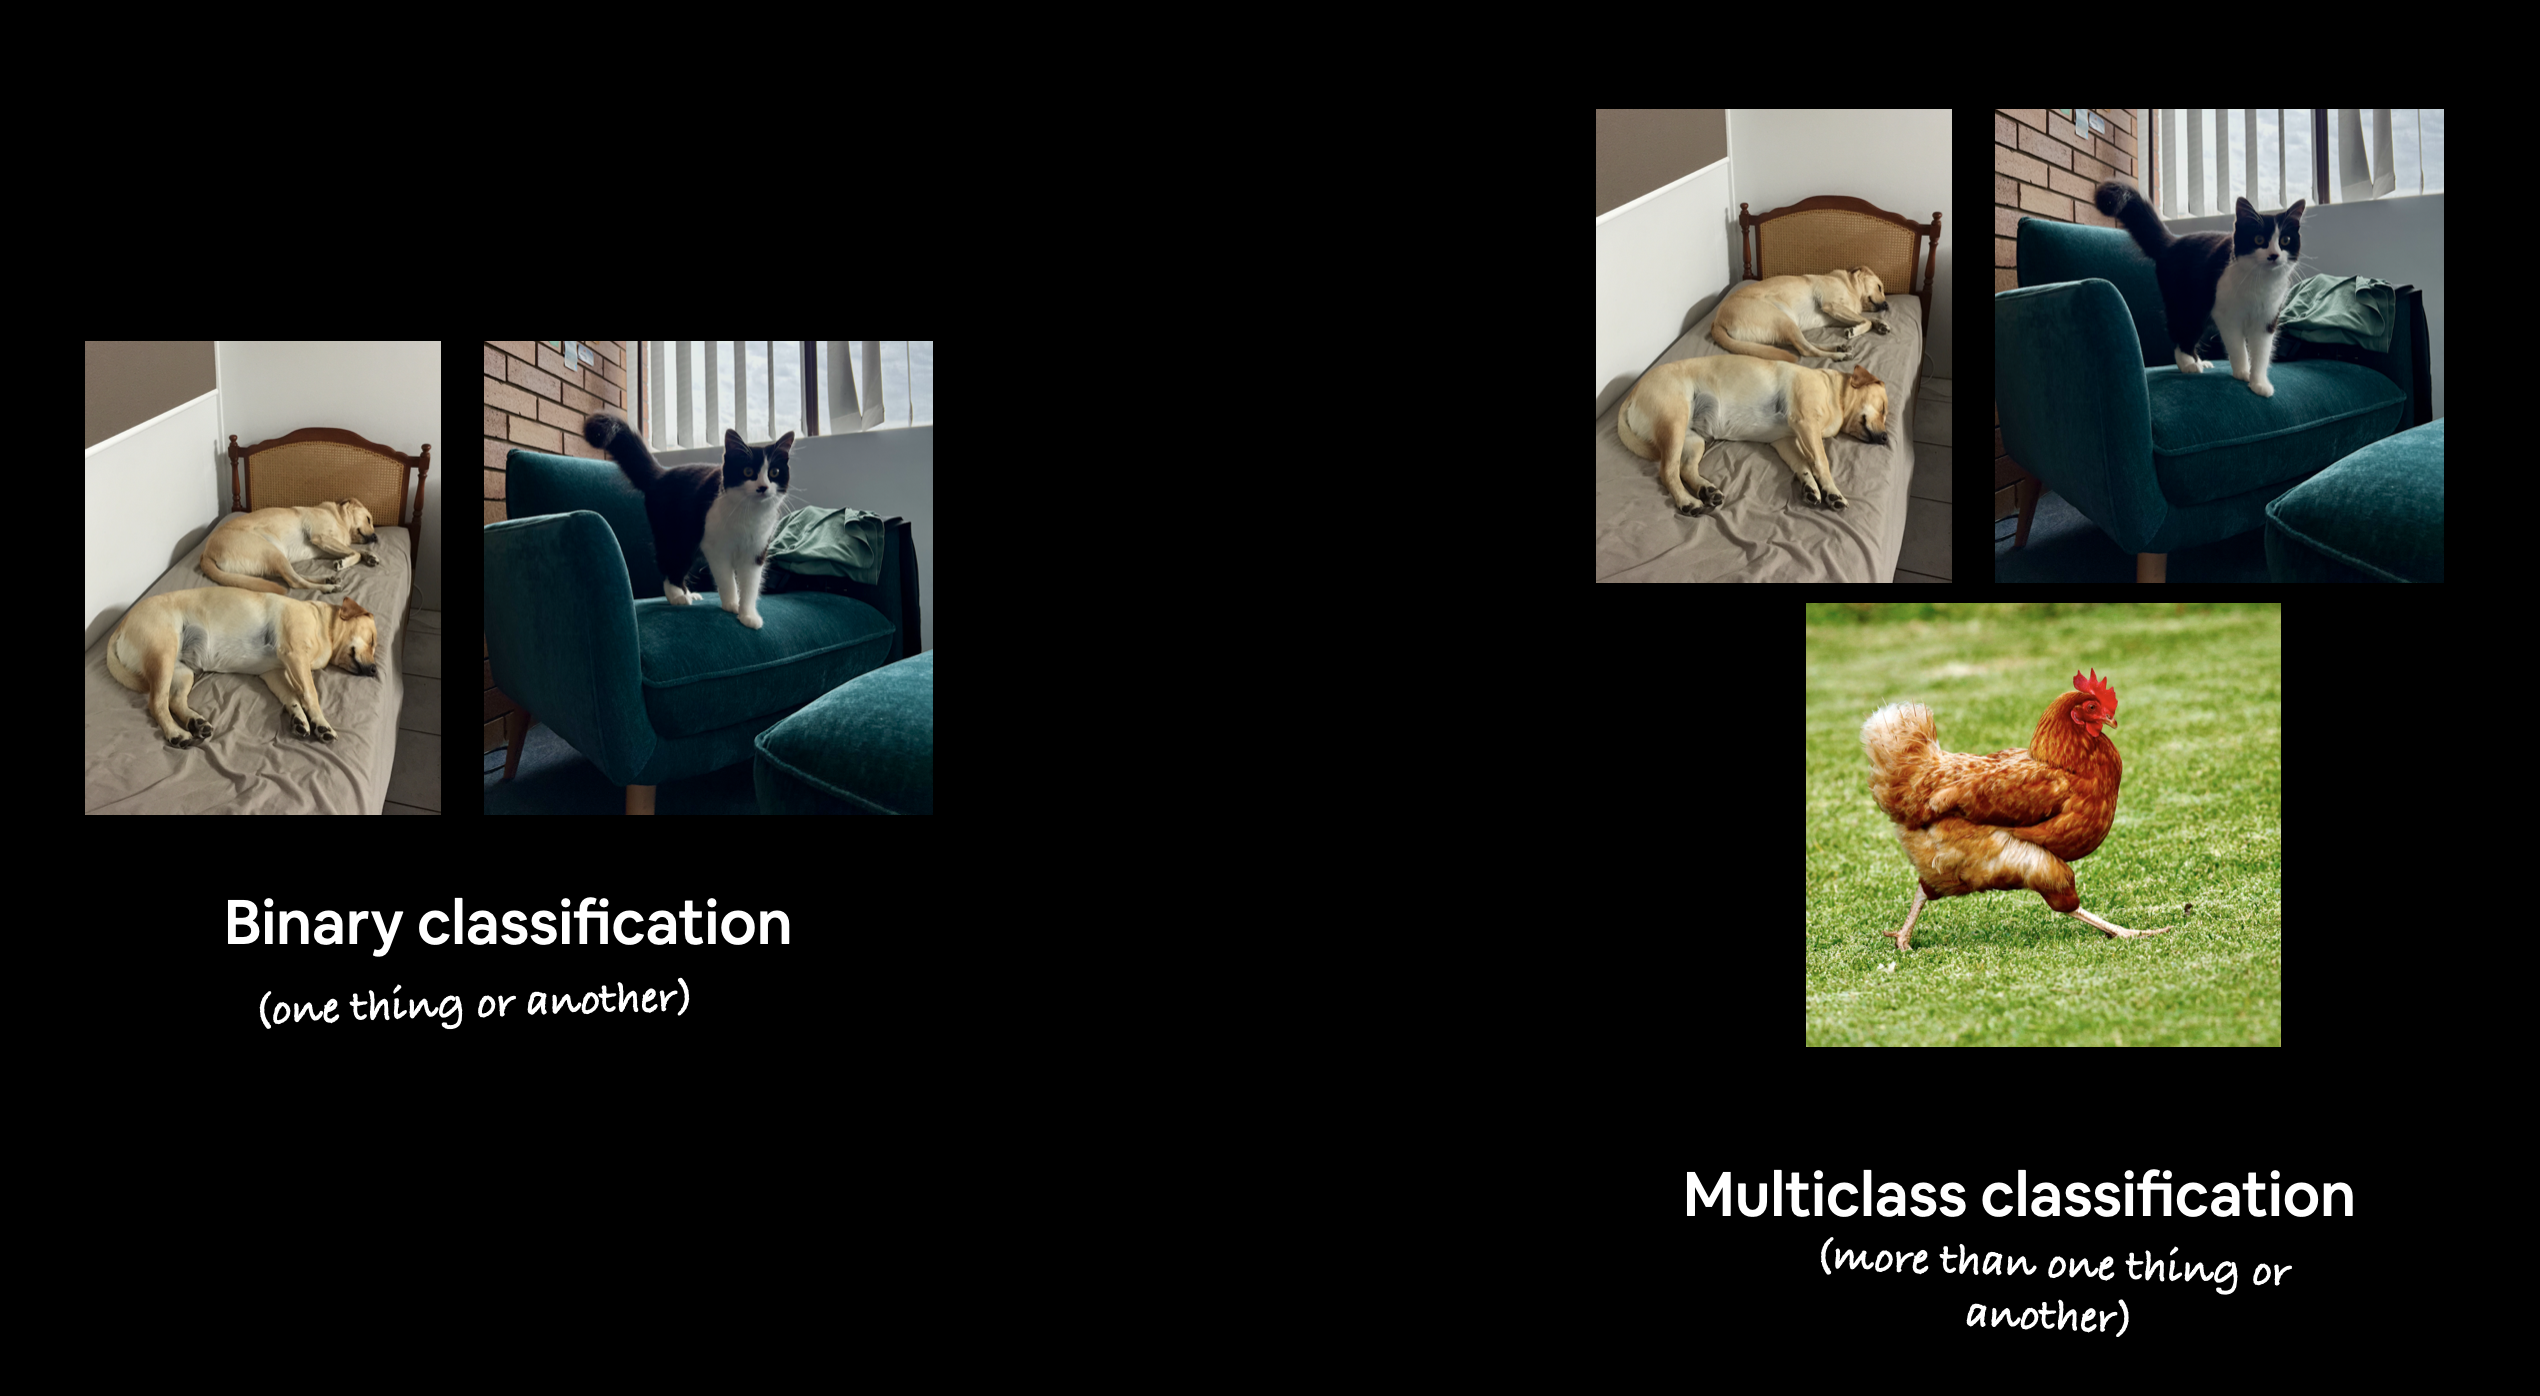 binary vs multi-class classification image with the example of dog vs cat for binary classification and dog vs cat vs chicken for multi-class classification